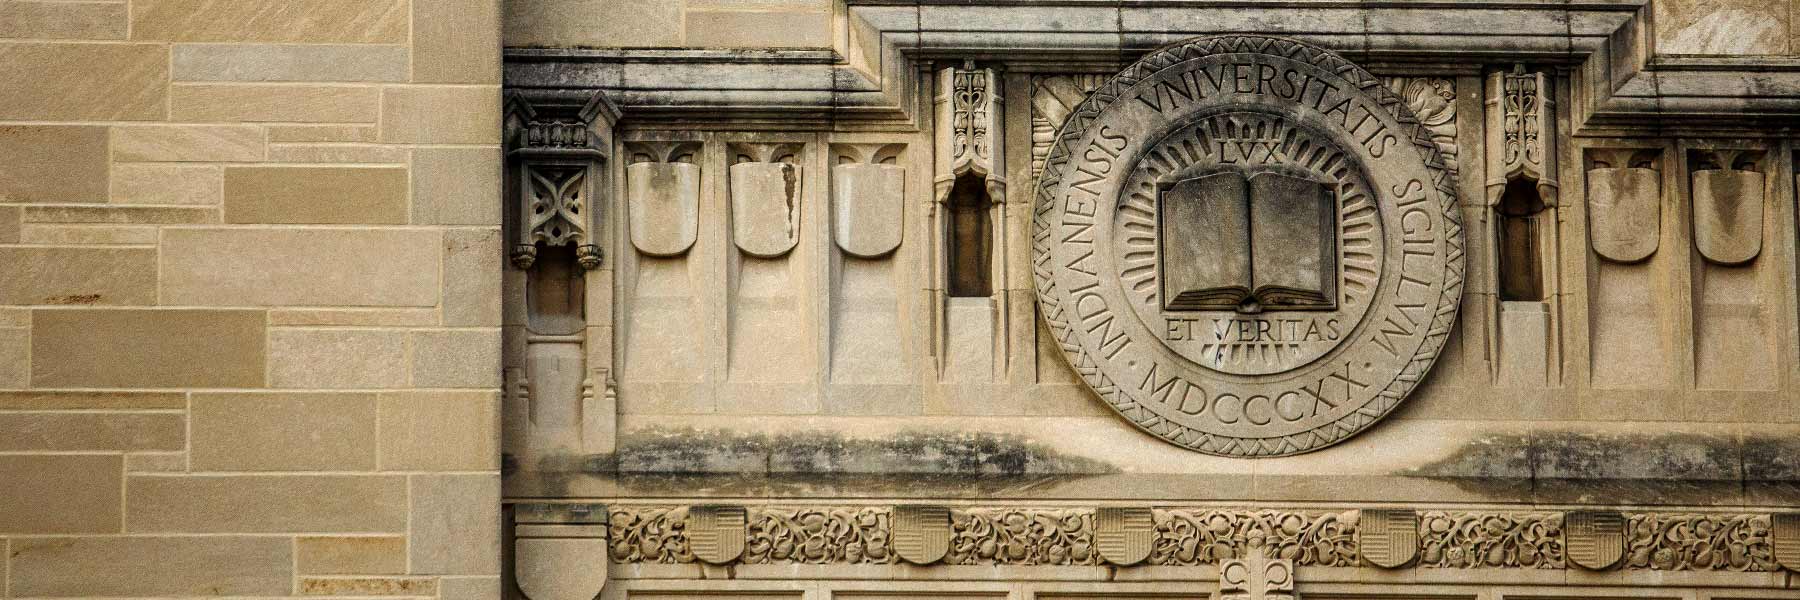 The Indiana University seal carved in limestone